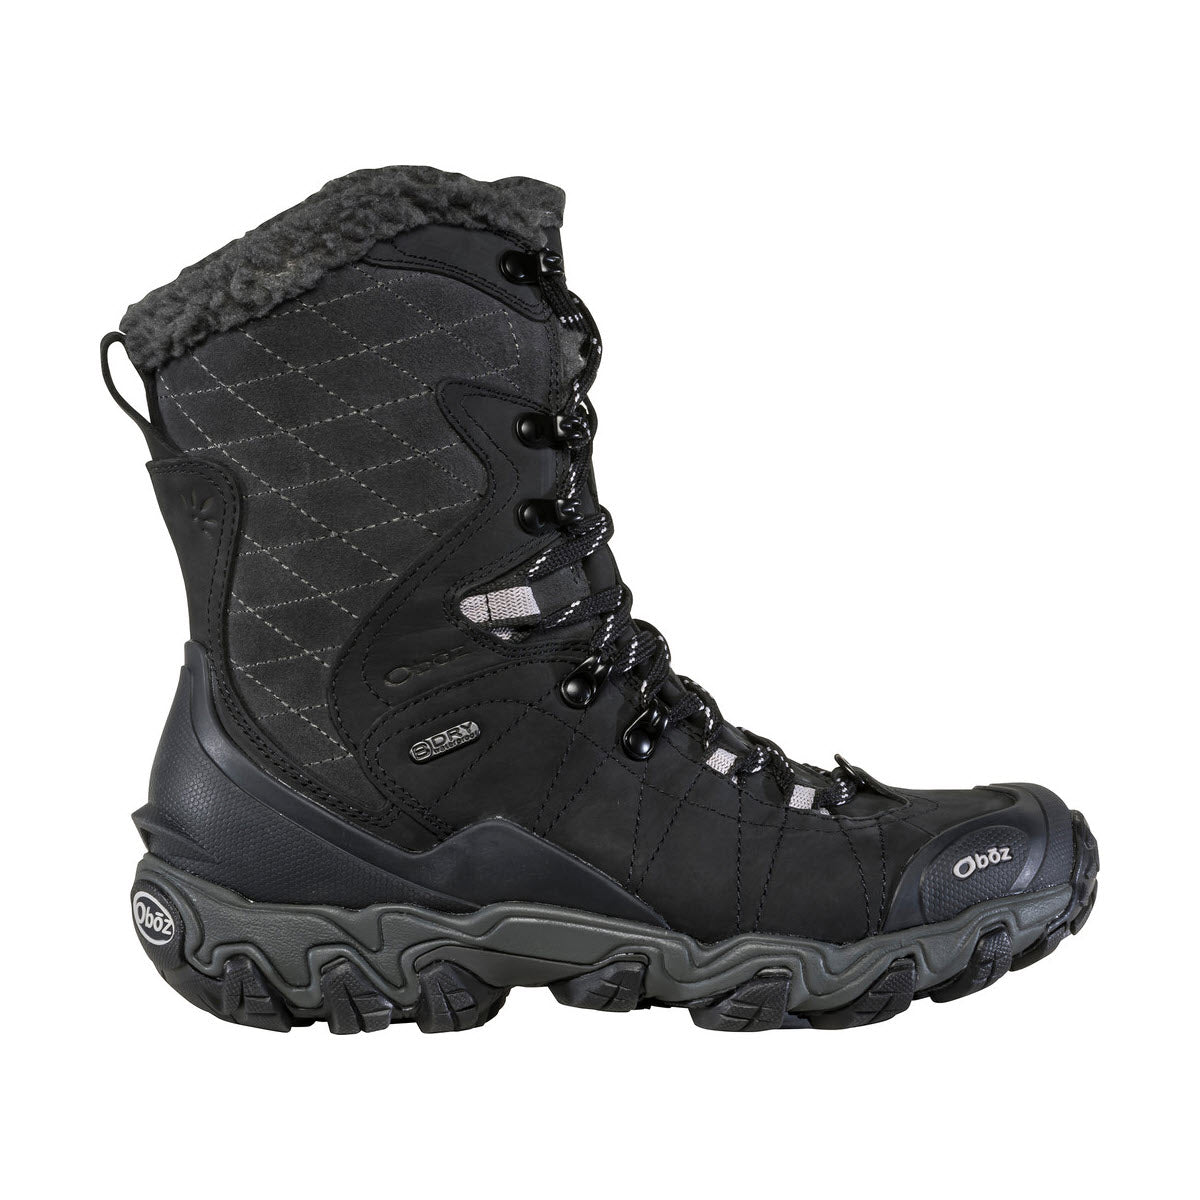 A Oboz Bridger 9" Insulated B-Dry Black Sea hiking boot with quilted detailing, fur lining at the collar, and a rugged sole, branded with the Oboz logo.